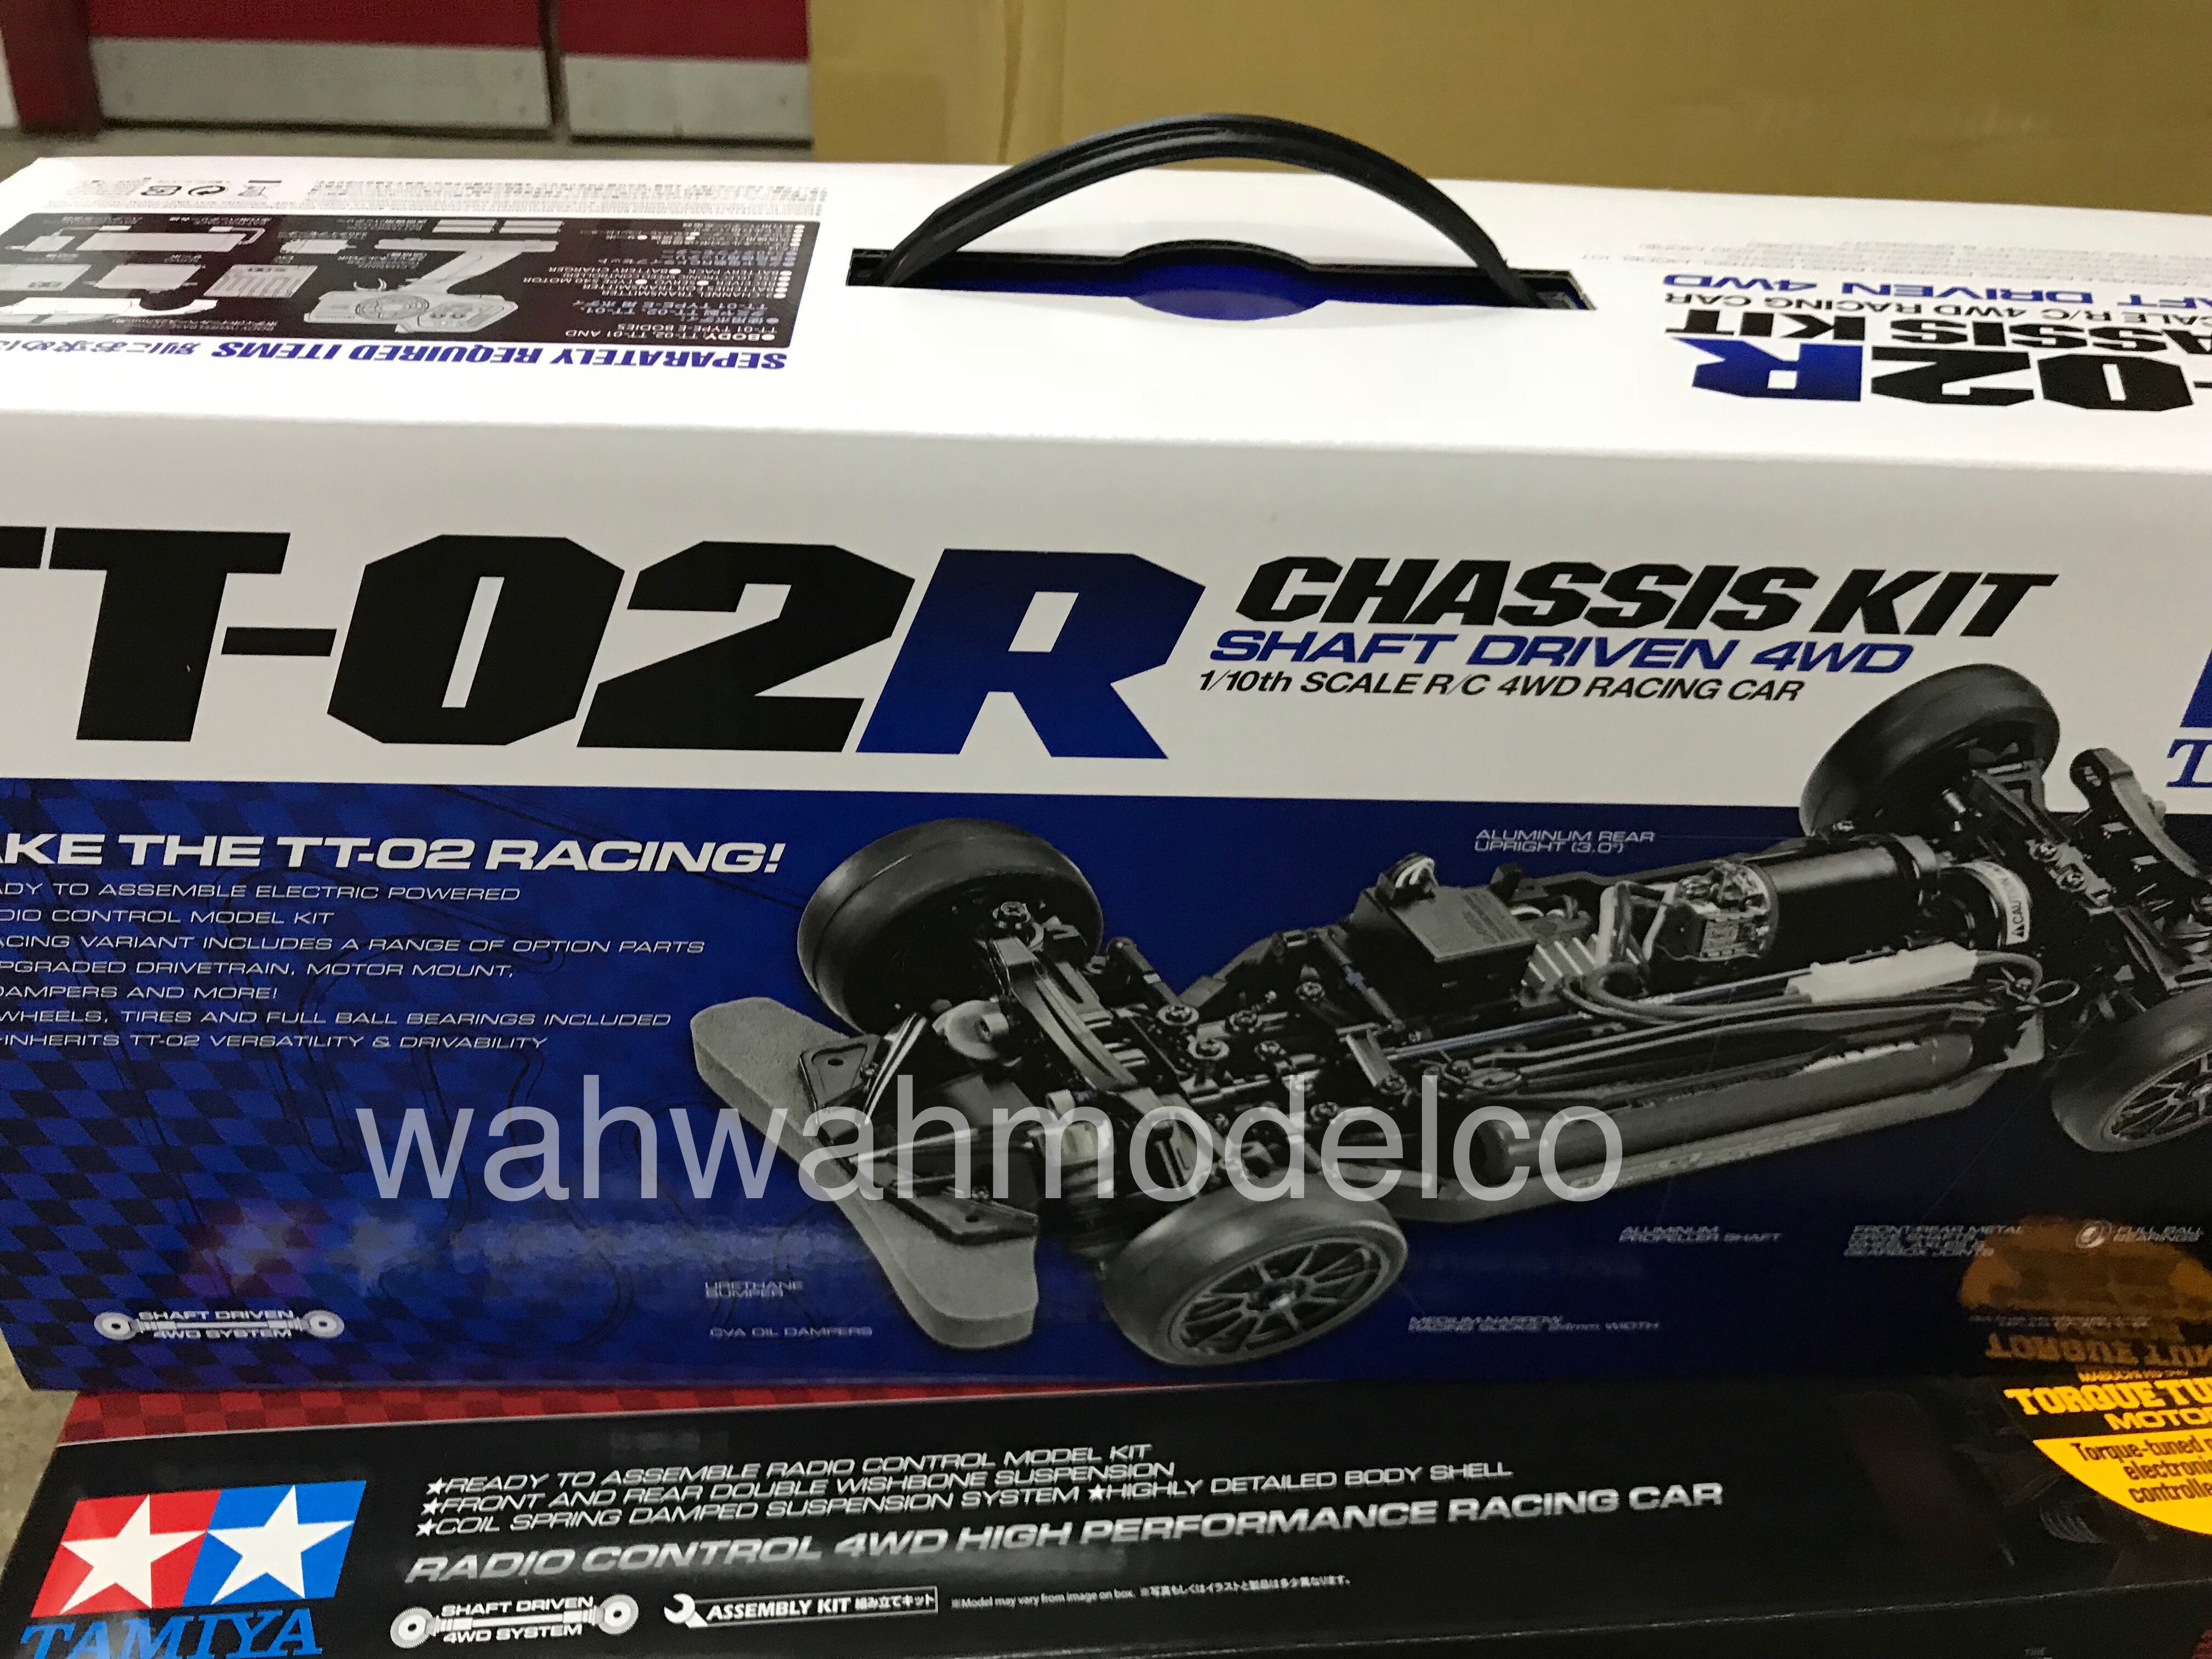 1/10 TT-02R Chassis 4WD Kit